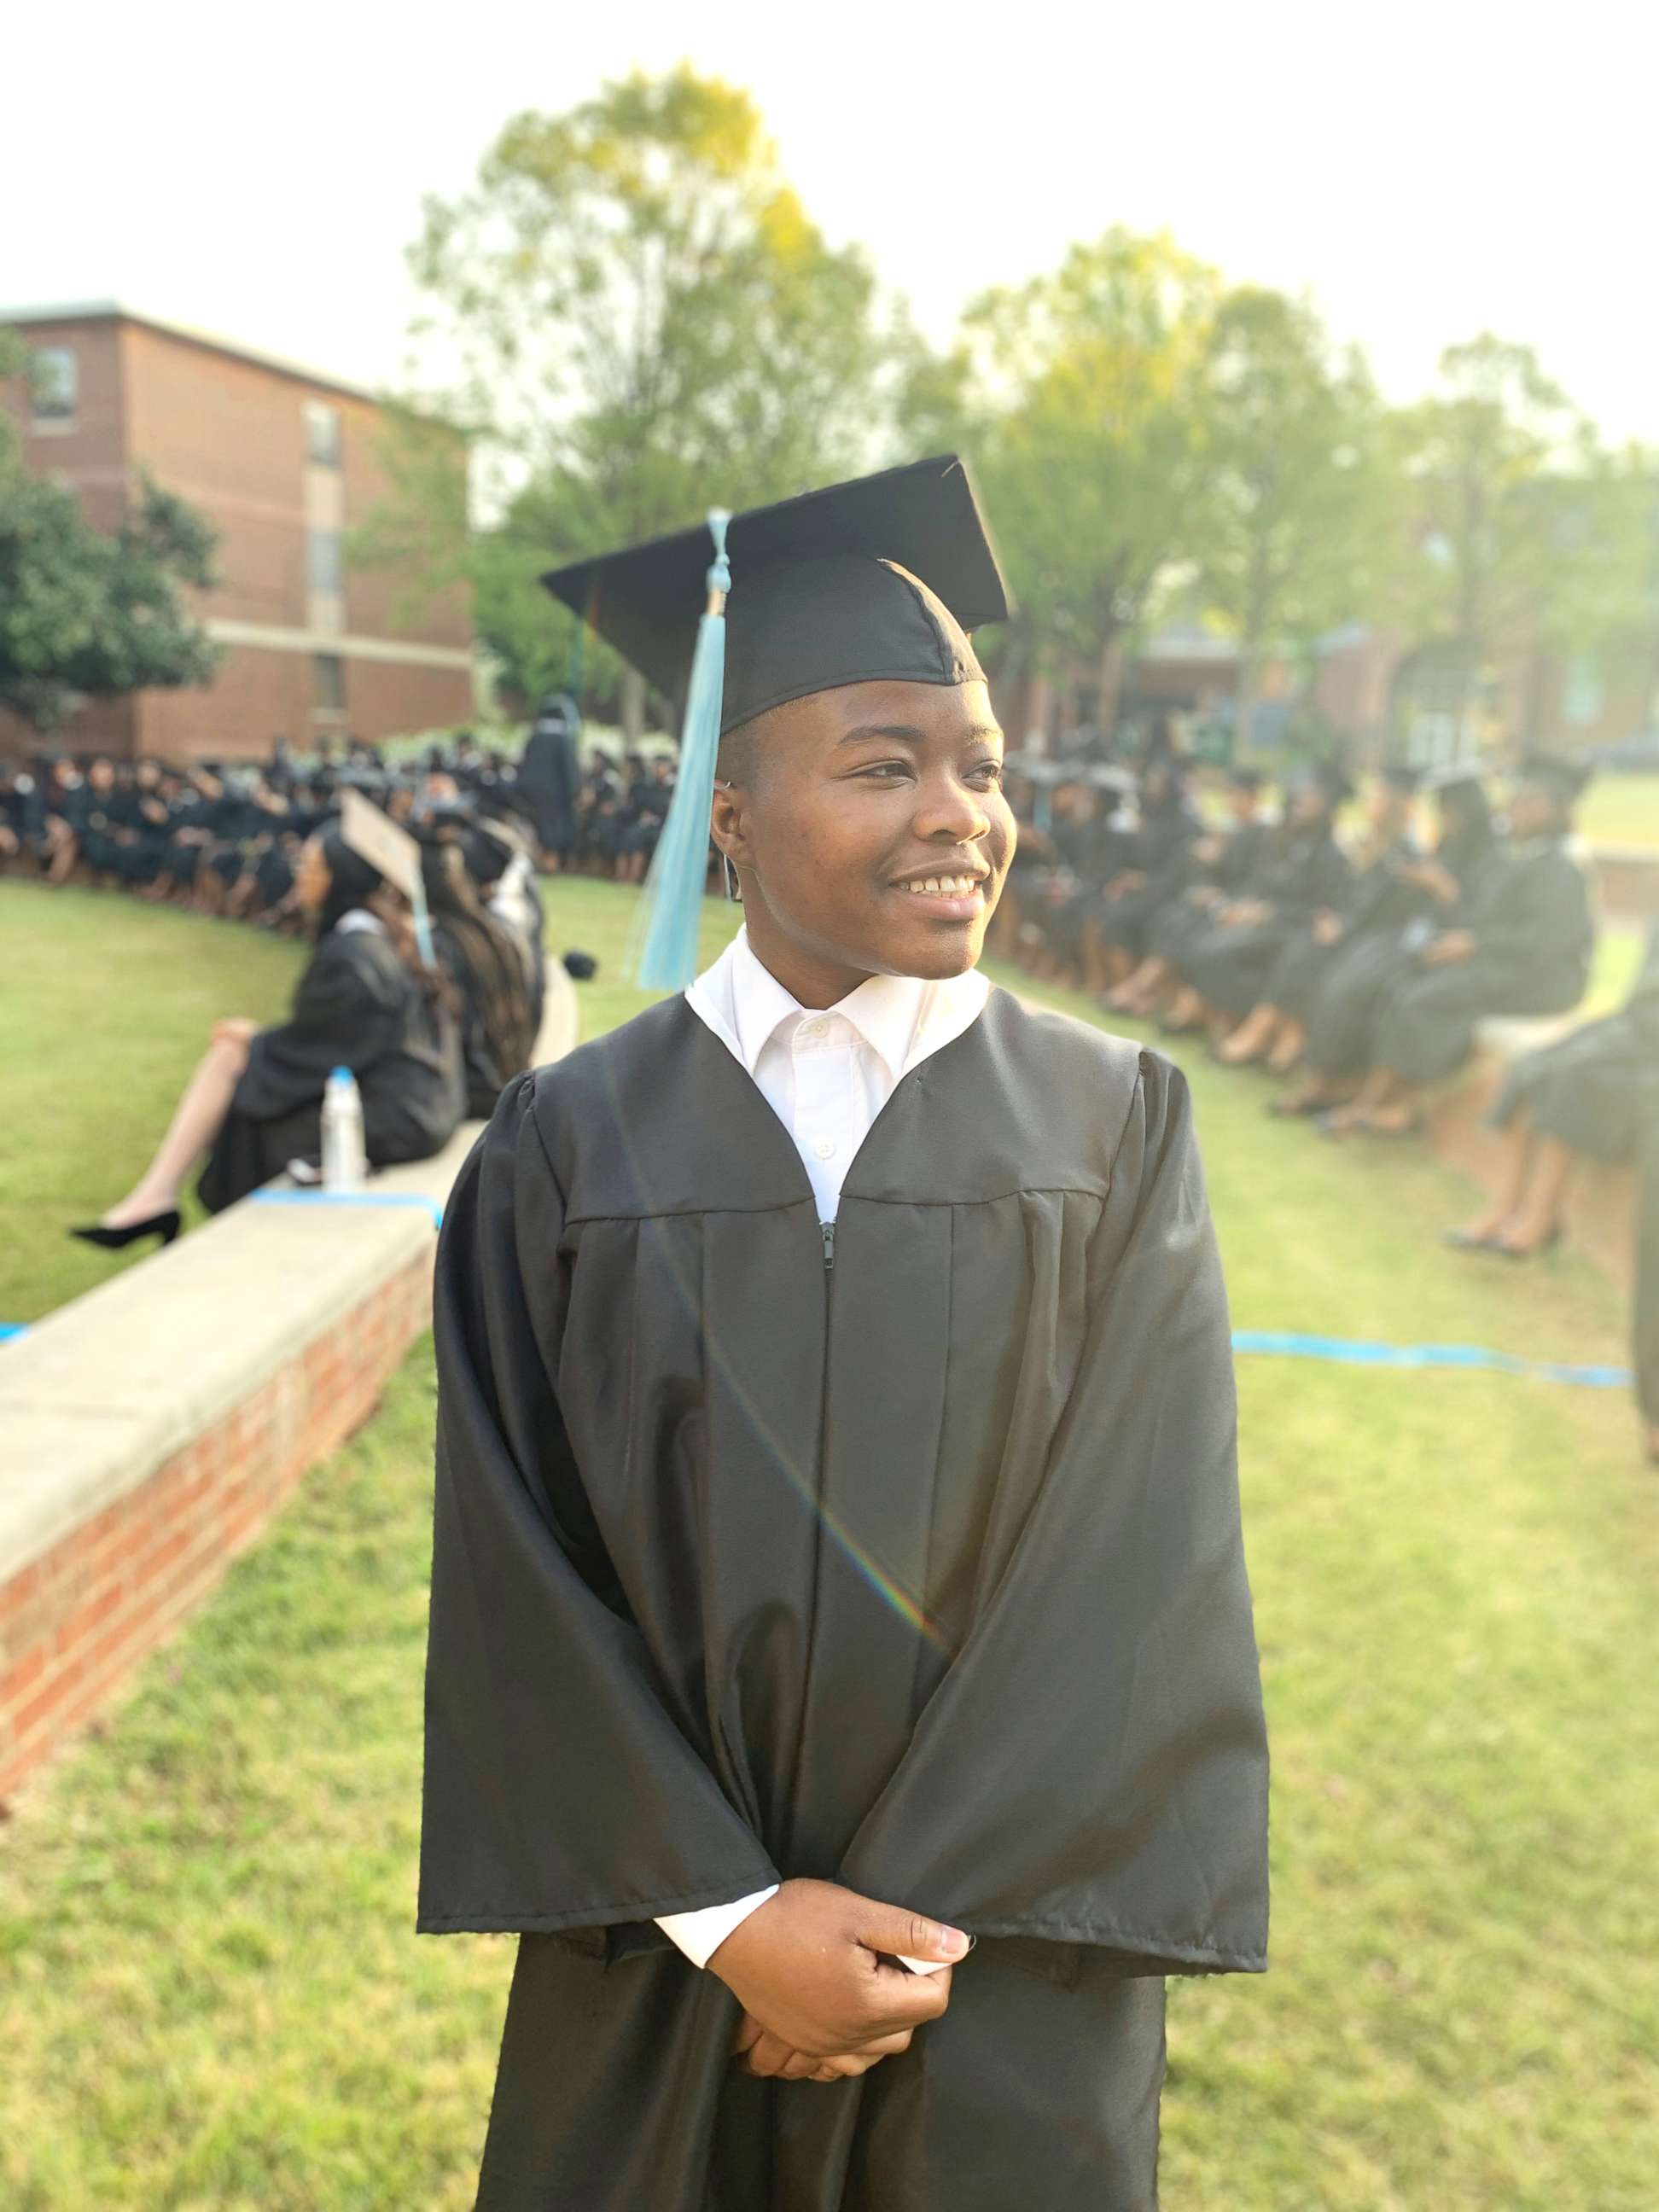 PHOTO: On May 19, Tiana Barnwell, 21, will graduated with a degree in political science from Spelman College in Atlanta.